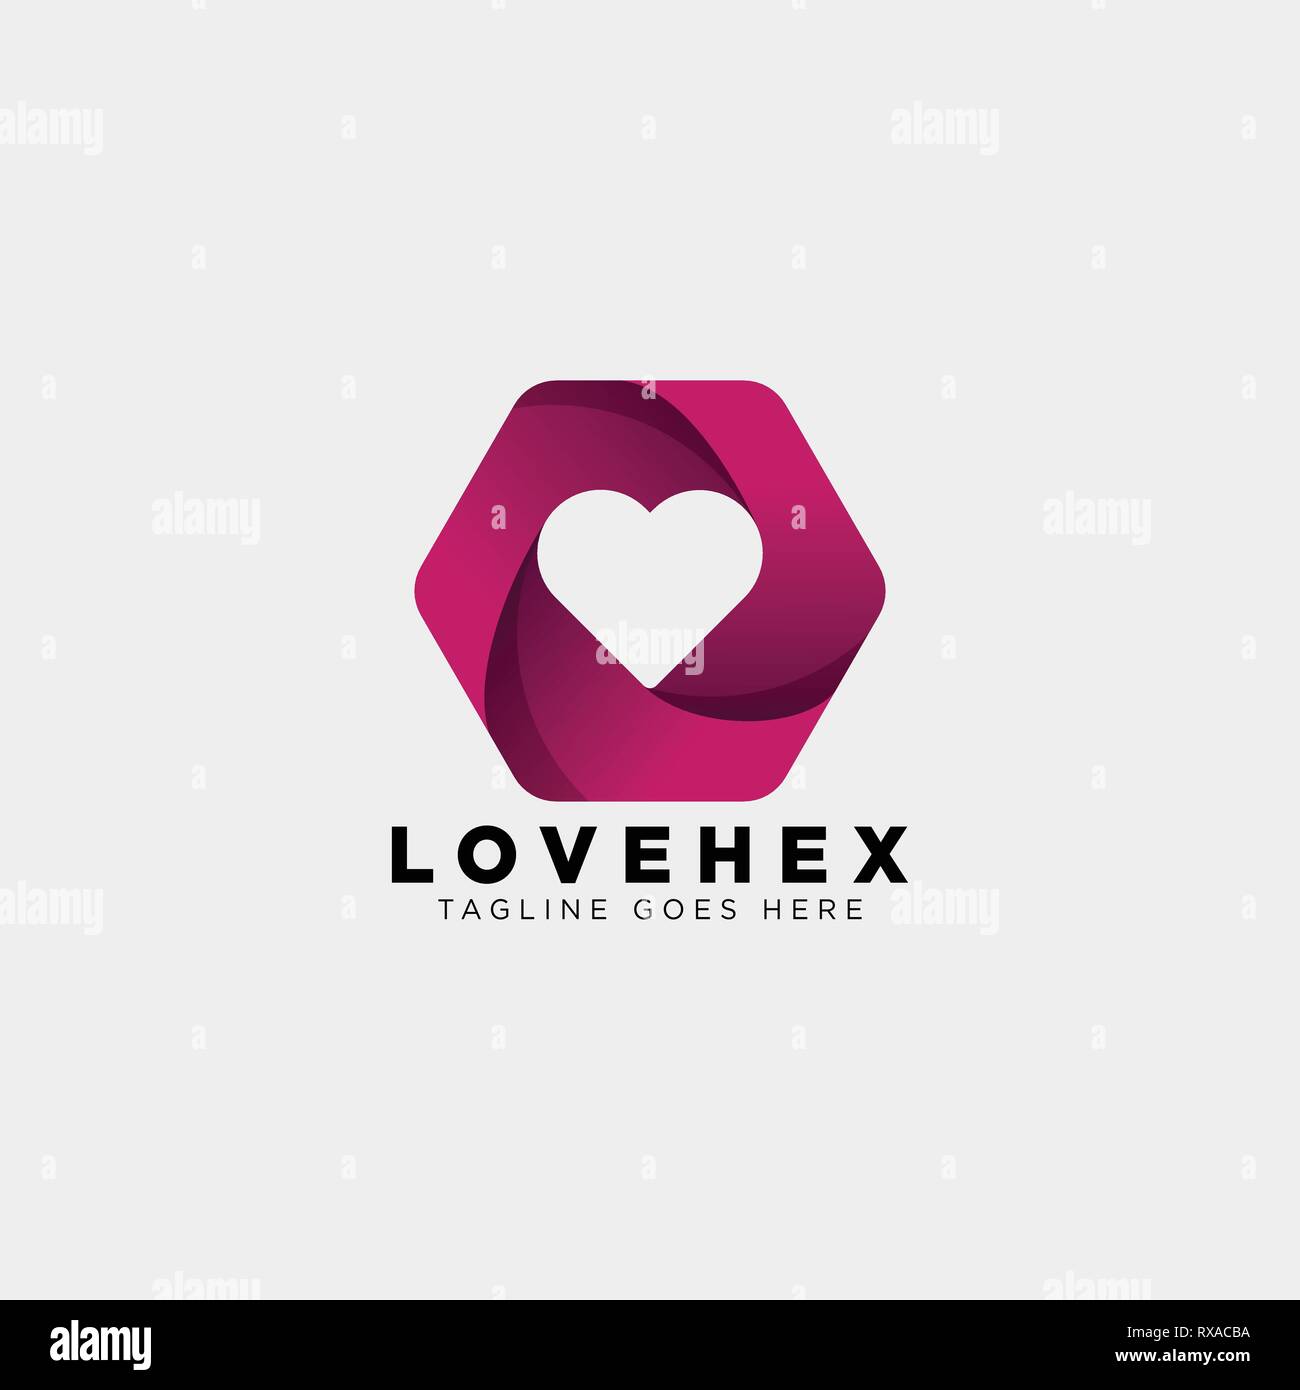 dating love hexagon gradient logo template vector illustration icon element isolated Stock Vector